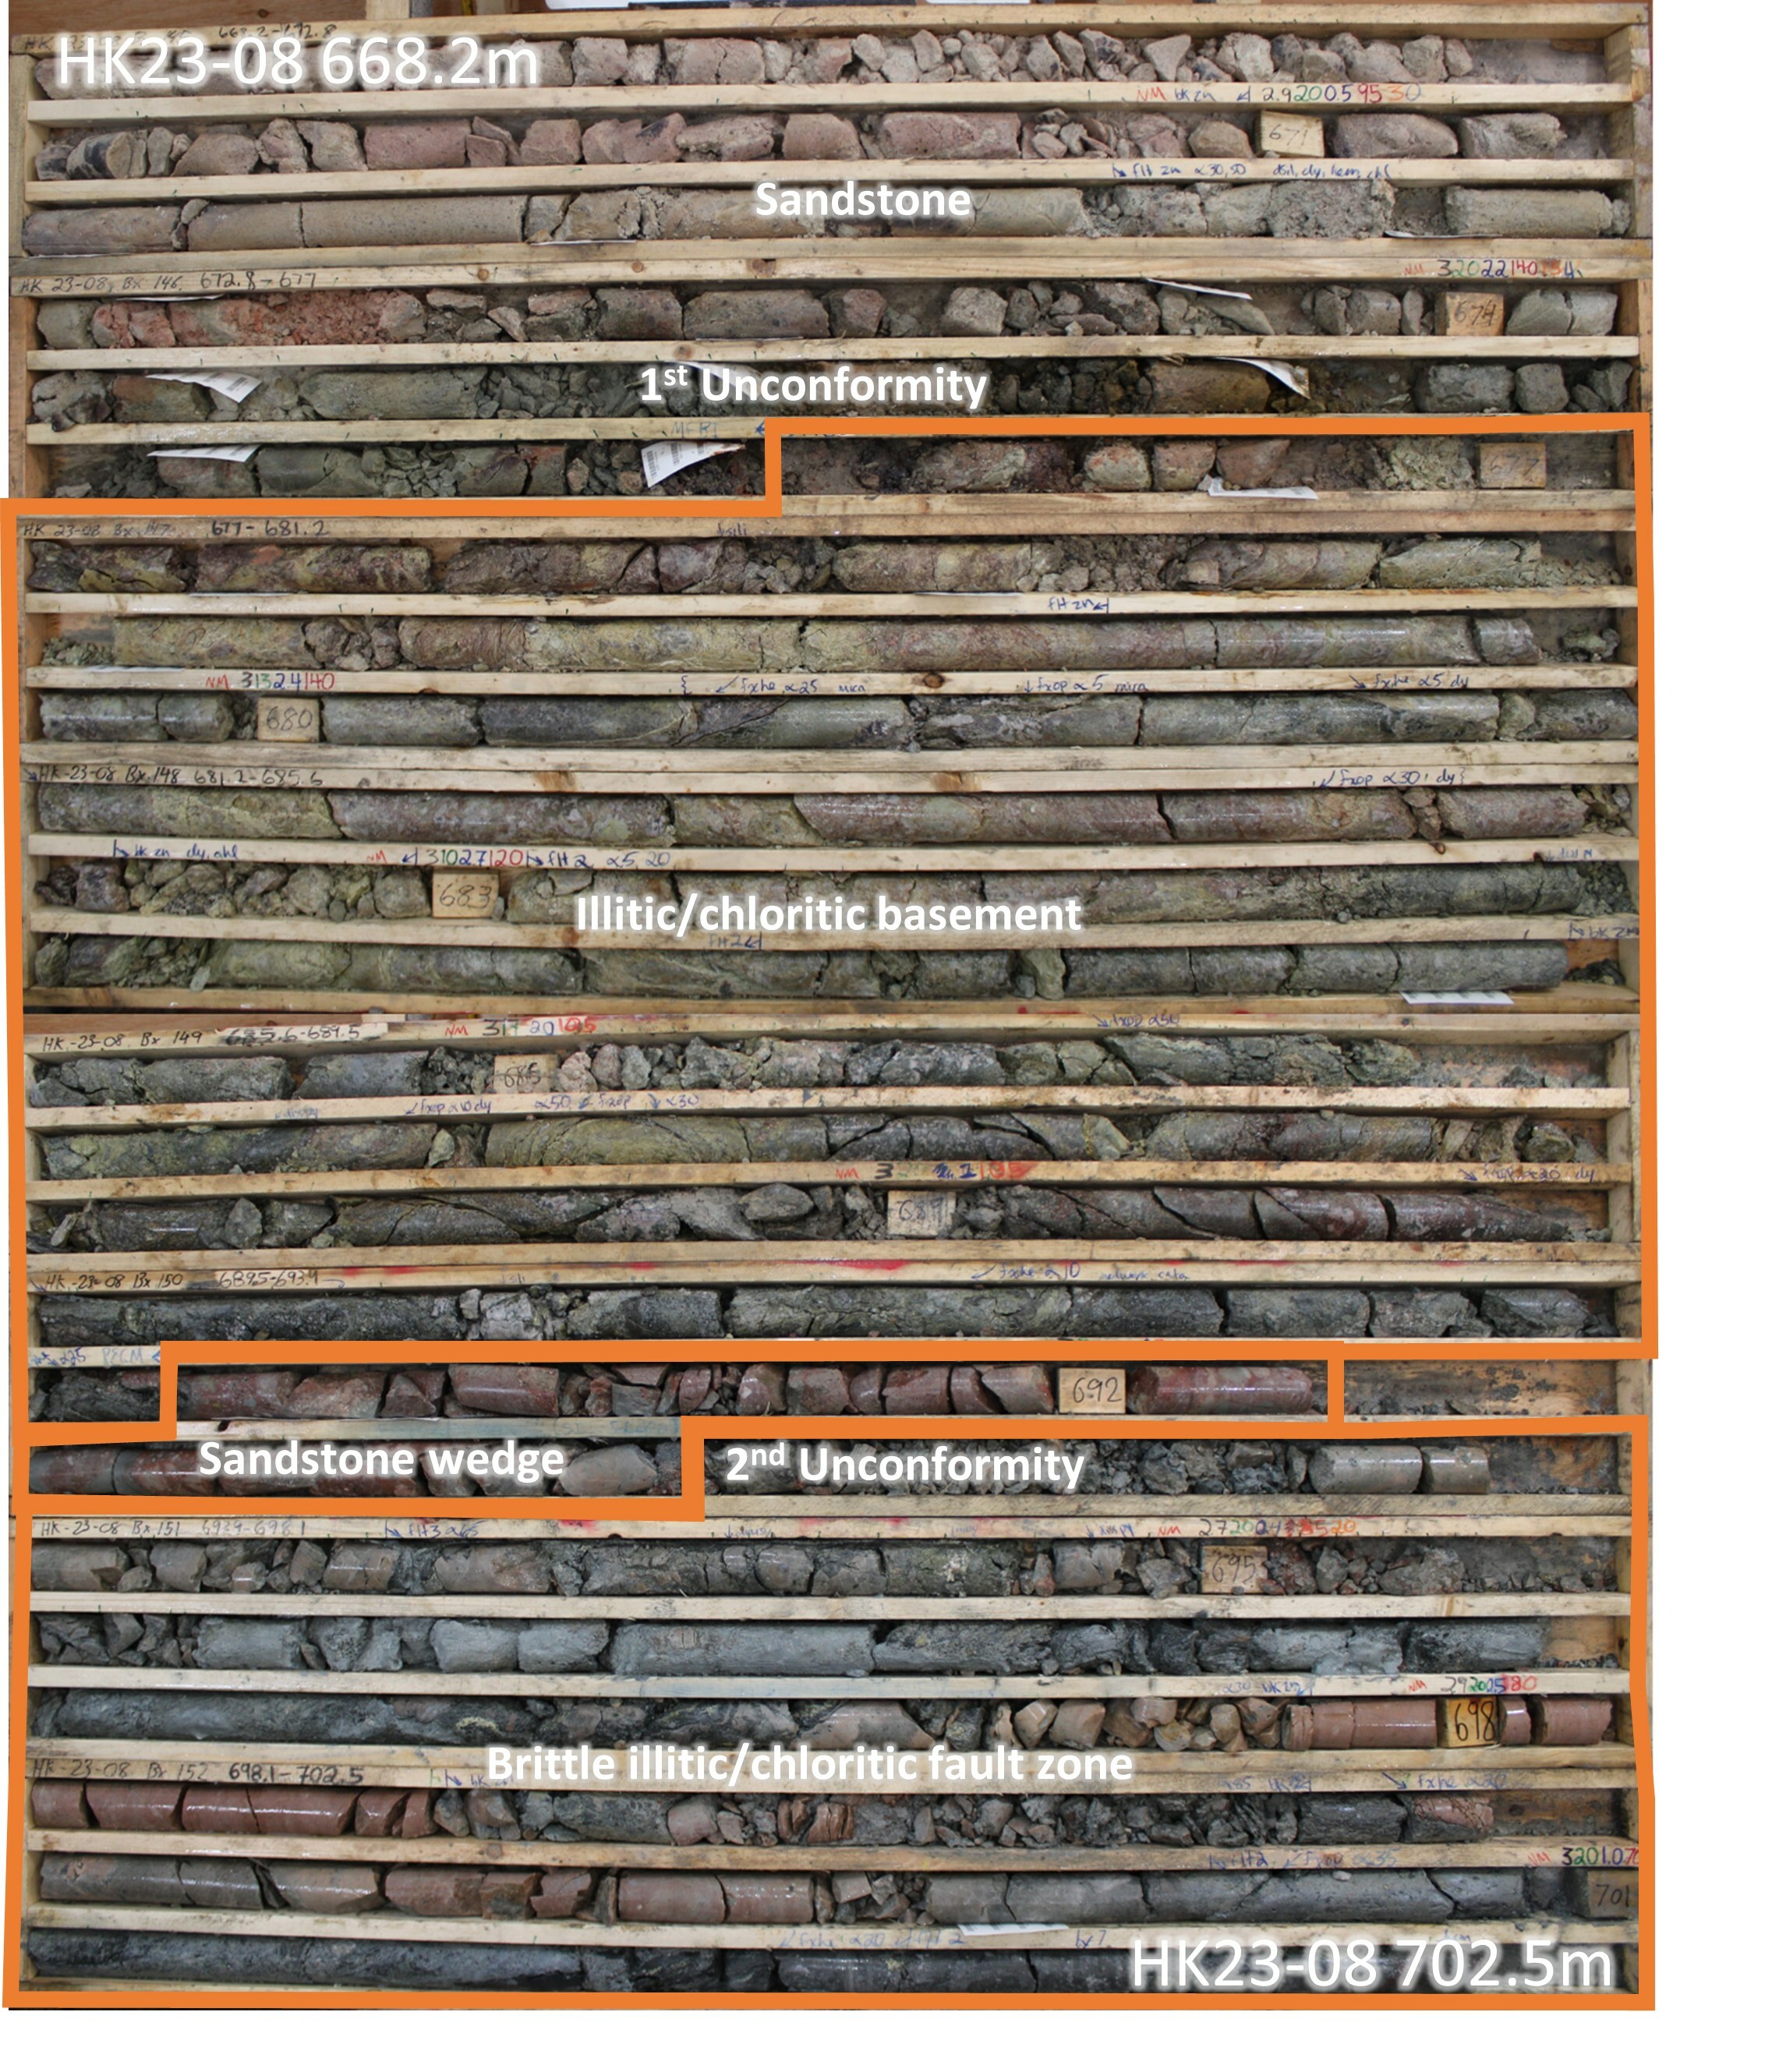 Figure 7 – Core photos from 668.2 m to 702.5 m downhole in drill hole HK23-08 illustrating strong alteration with a fault zone in the lower sandstone and upper basement. The unconformity between the sandstone and basement gneisses was intersected twice in this hole as the unconformity is structurally repeated across a fault strand within a broader altered fault zone. Refer to the cross section in Figure 6 for the location of the photographed interval and for the interpretation of fault offset of the unconformity. (CNW Group/IsoEnergy Ltd.)